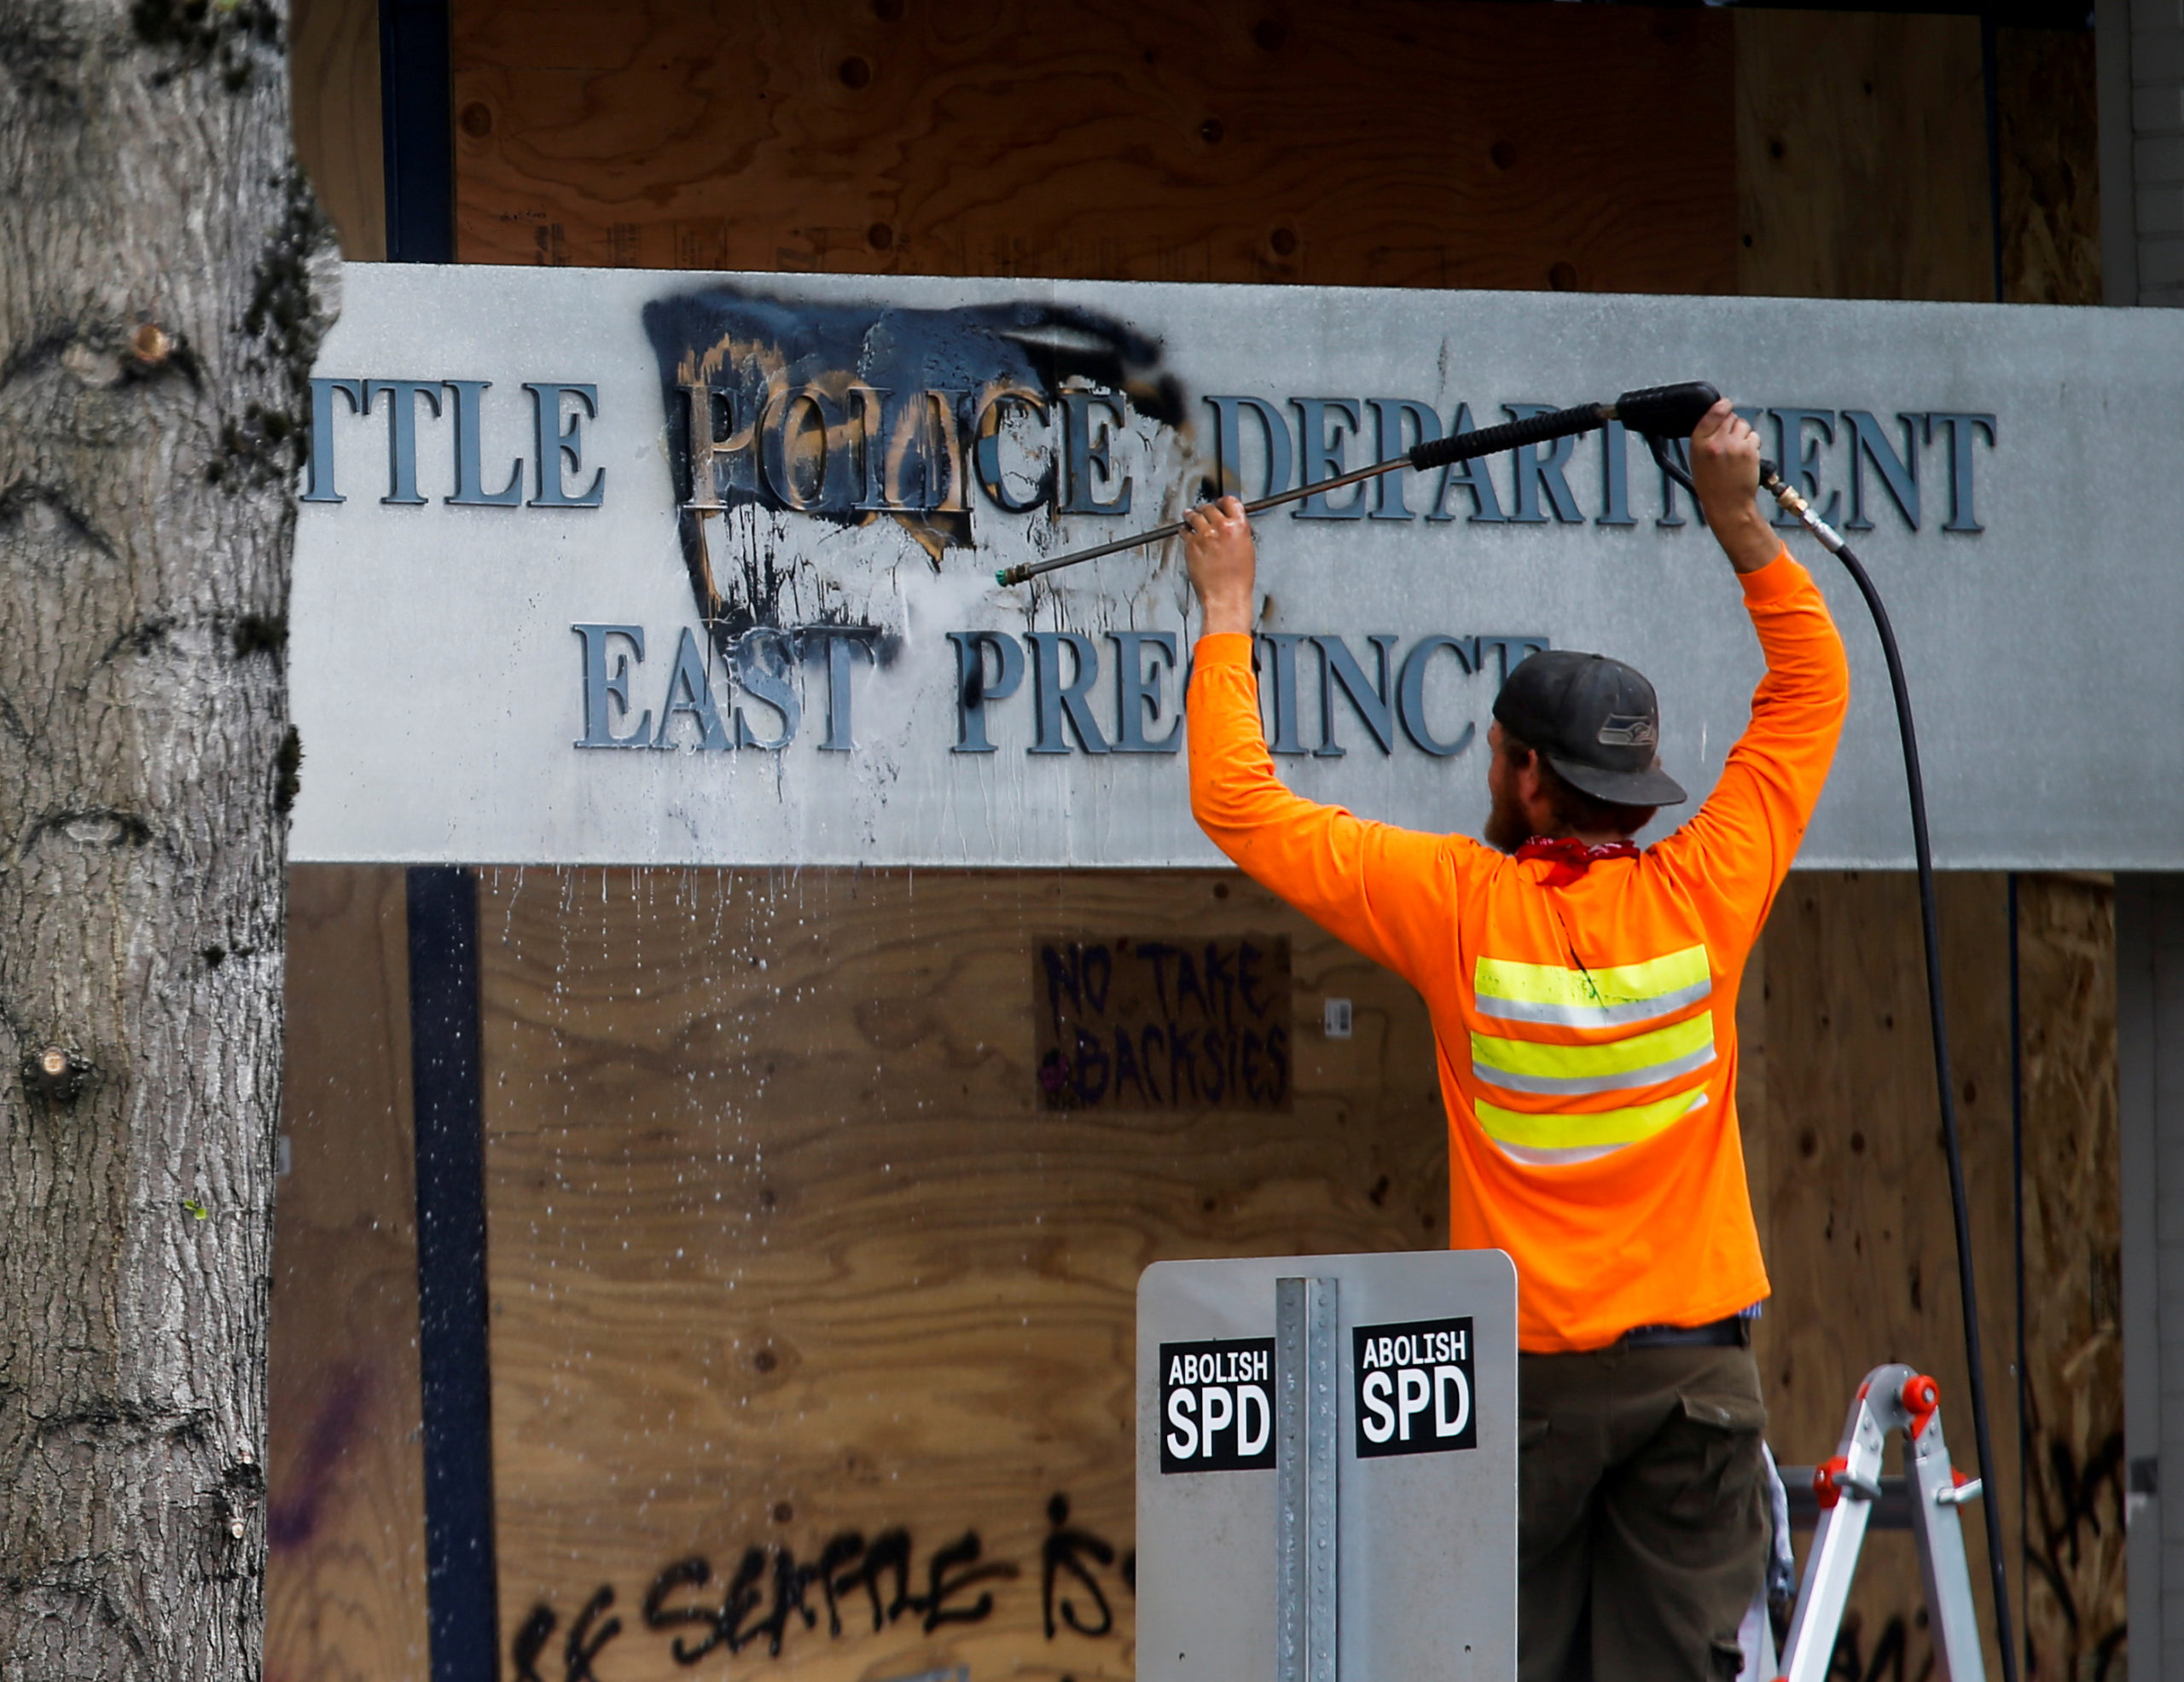 A worker cleans off the word "people" graffitied over the word "police" at the Seattle Police Department's East Precinct as they retake the Capitol Hill Occupied Protest (CHOP) area, in Seattle, Washington, U.S. July 1, 2020.